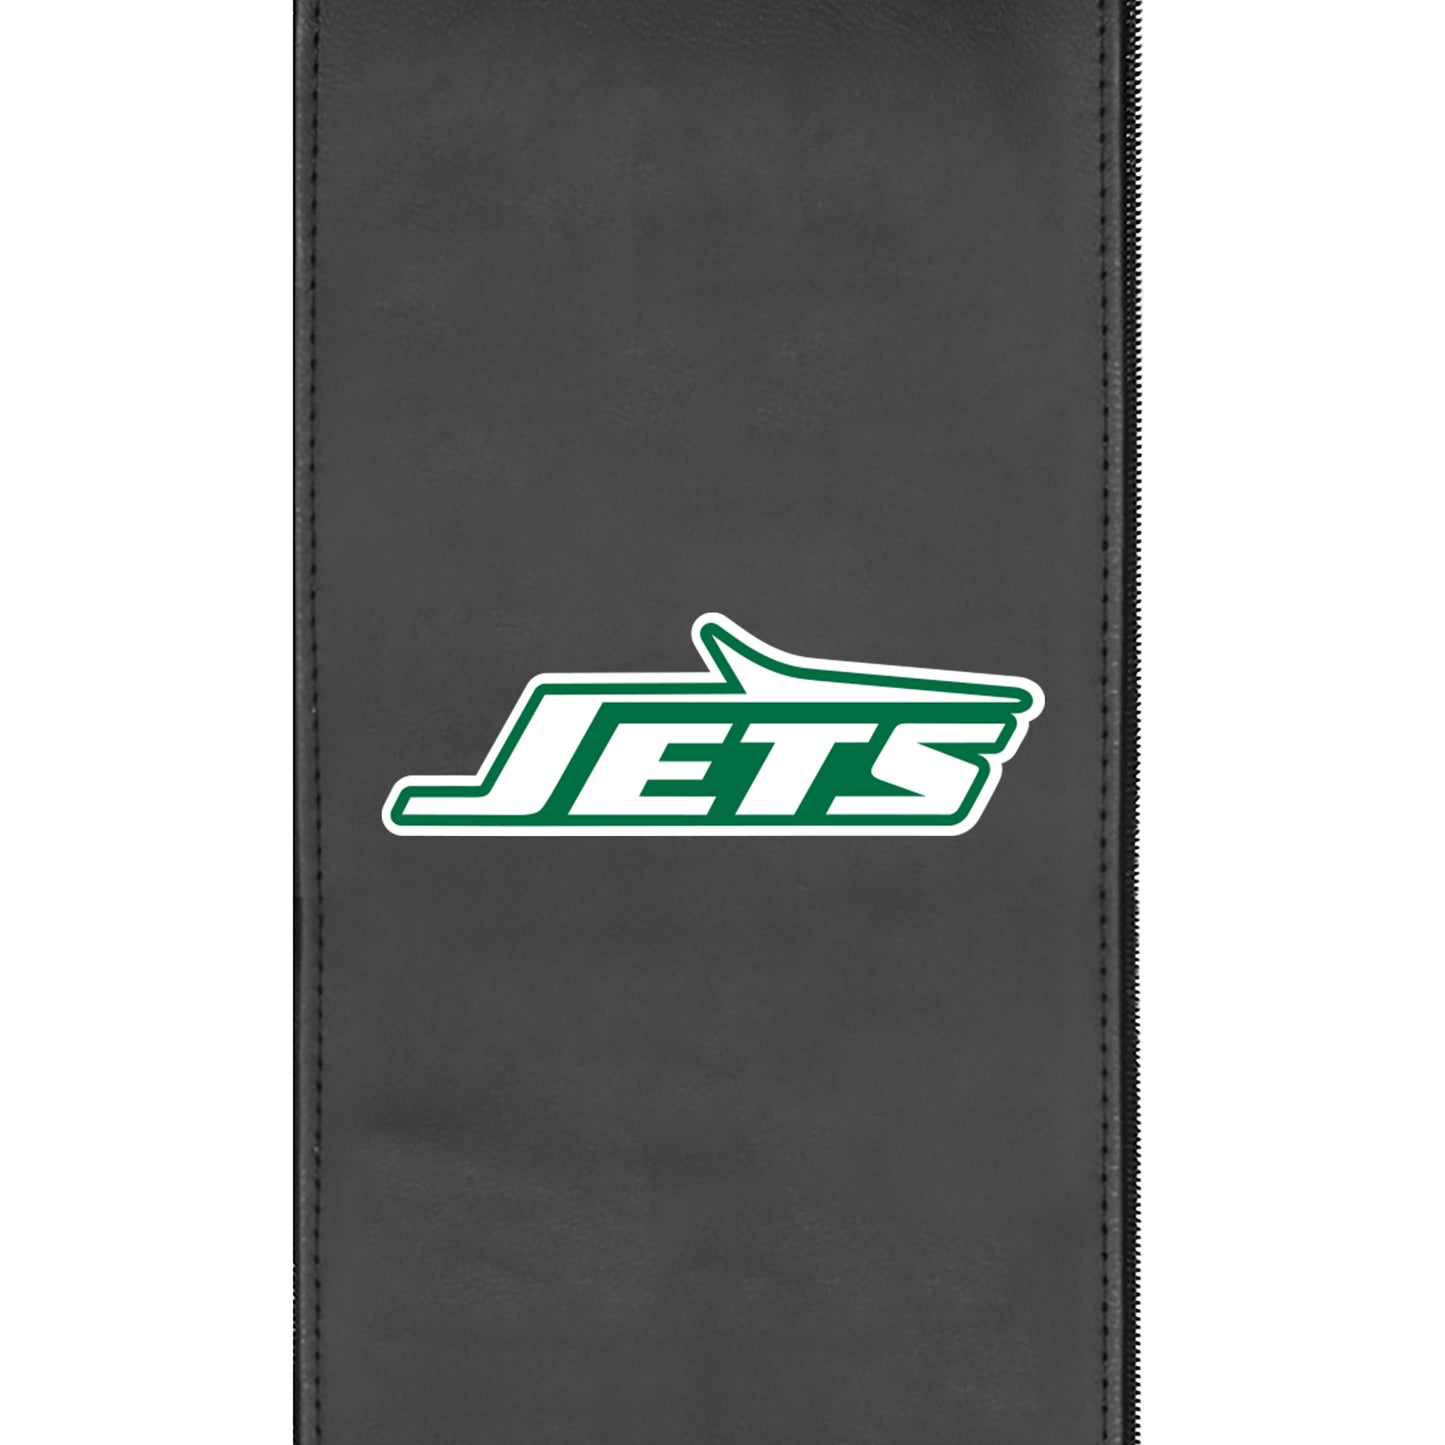 Office Chair 1000 with New York Jets Classic Logo